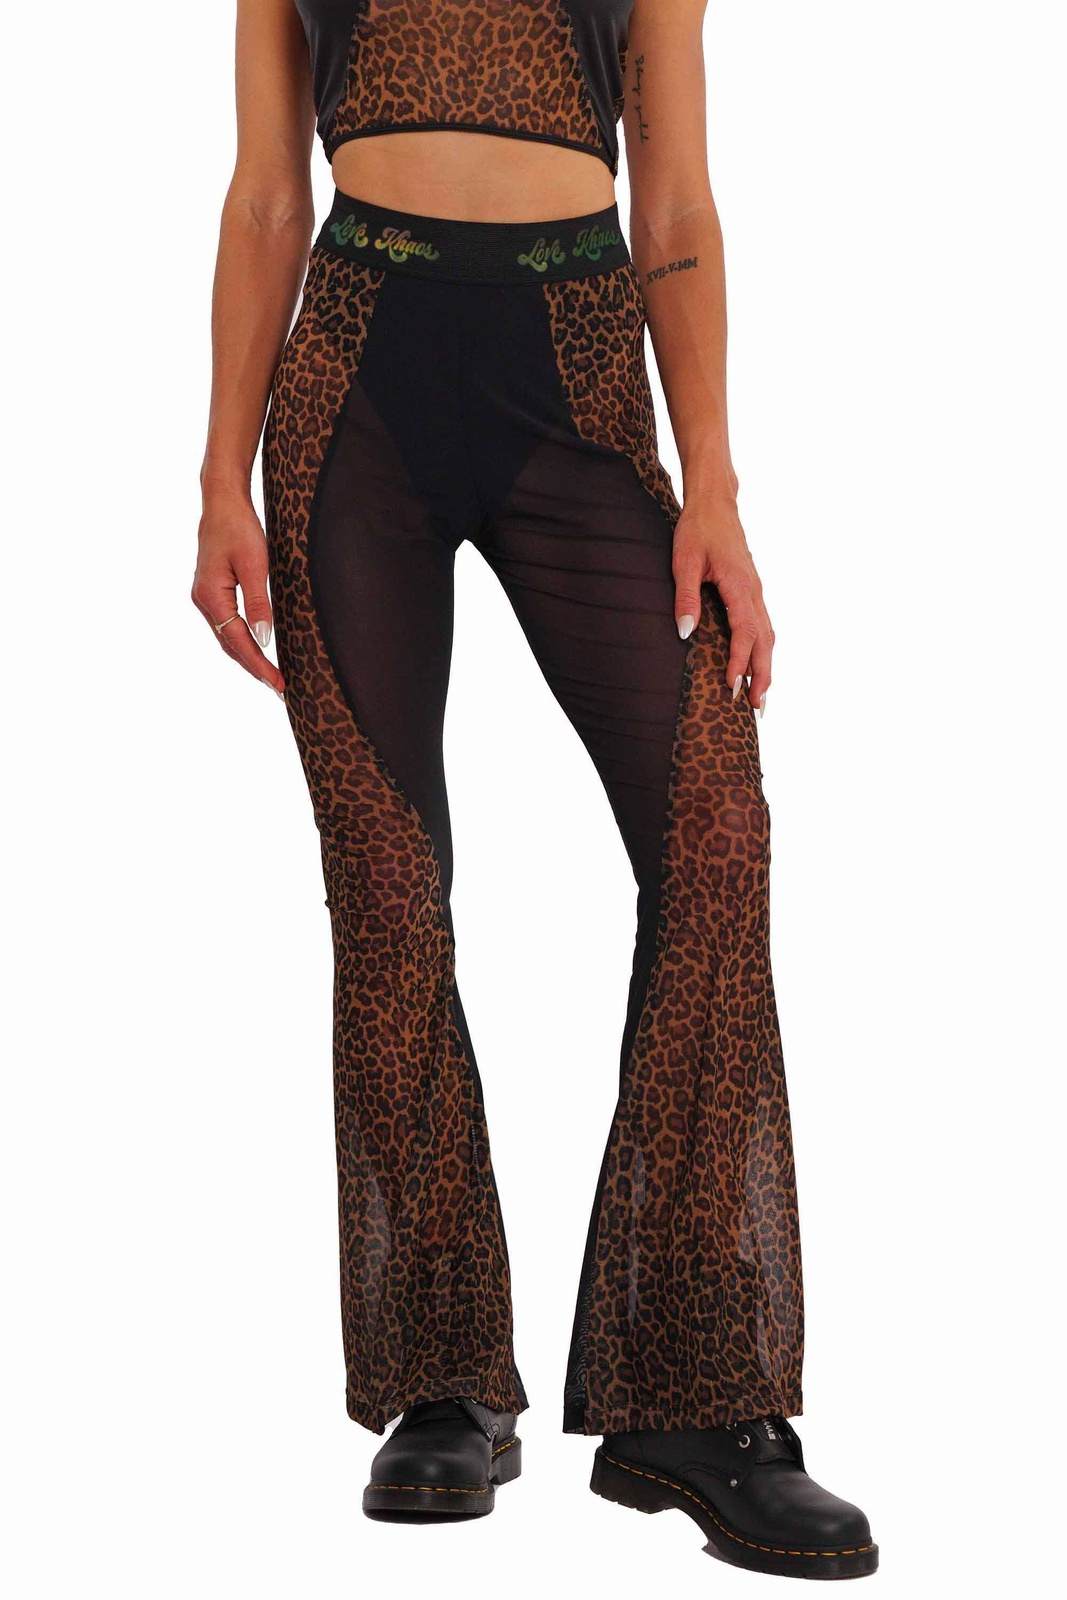 Black mesh and leopard bell bottoms from Love Khaos